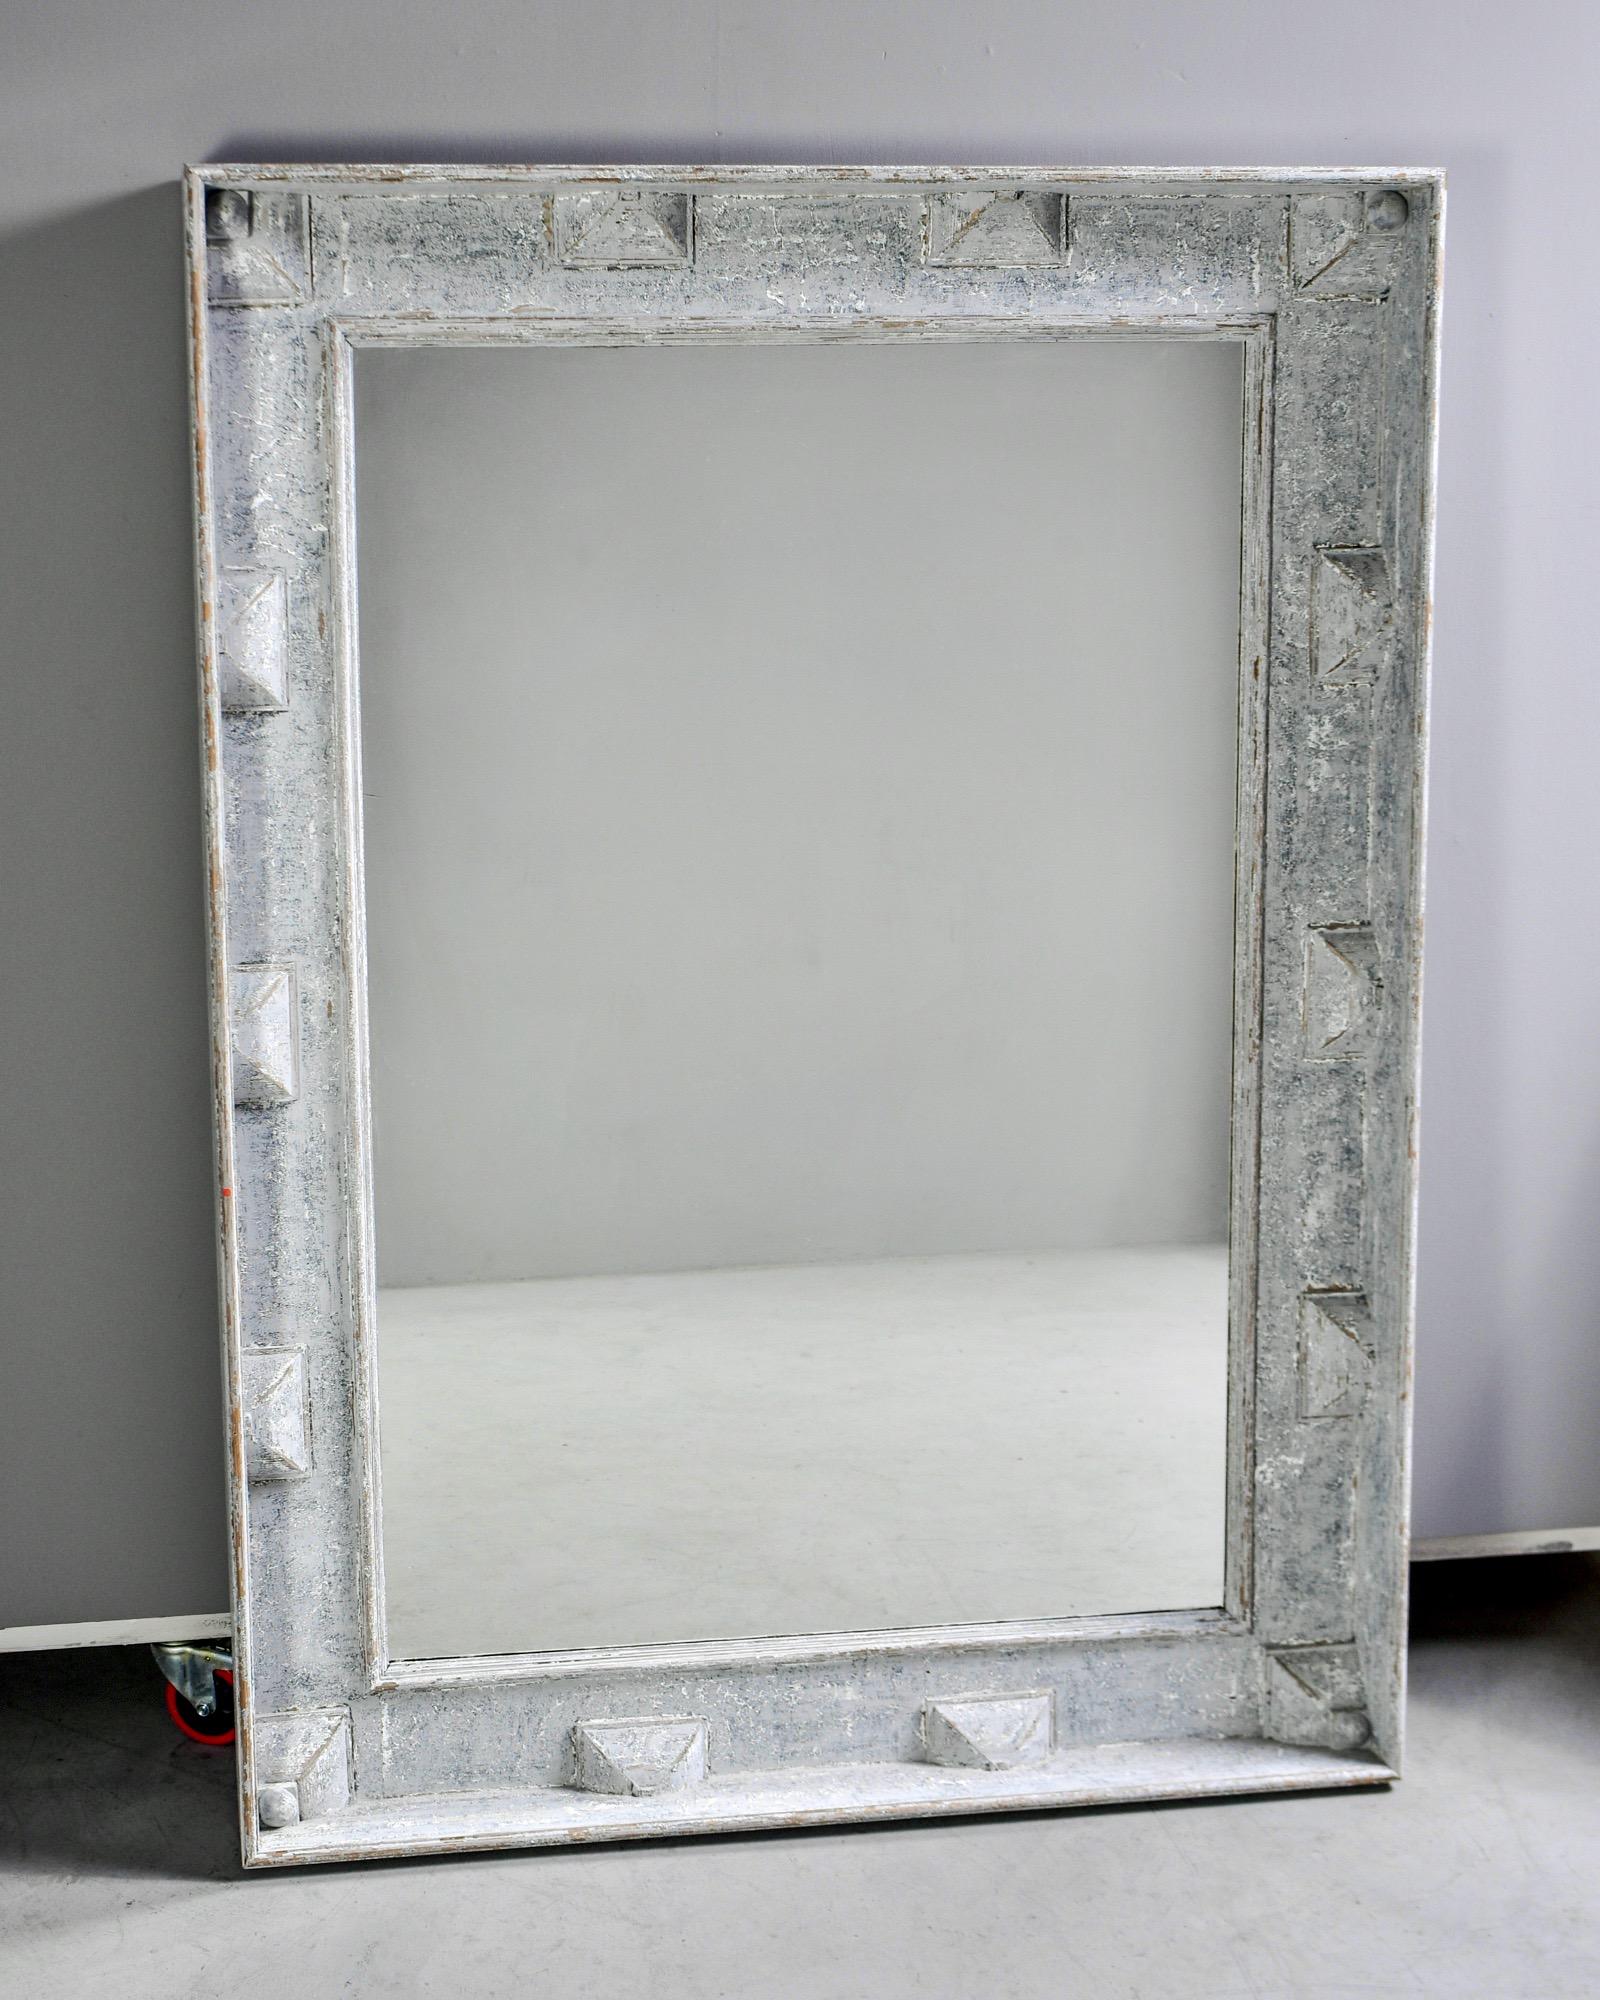 Large Swedish style mirror measures over five feet tall, circa 2010. Wide wooden frame has a decorative border of raised, pyramid-like forms and a gray-blue painted finish. Actual mirror is 51.75” high x 35” wide. Unknown maker.
 